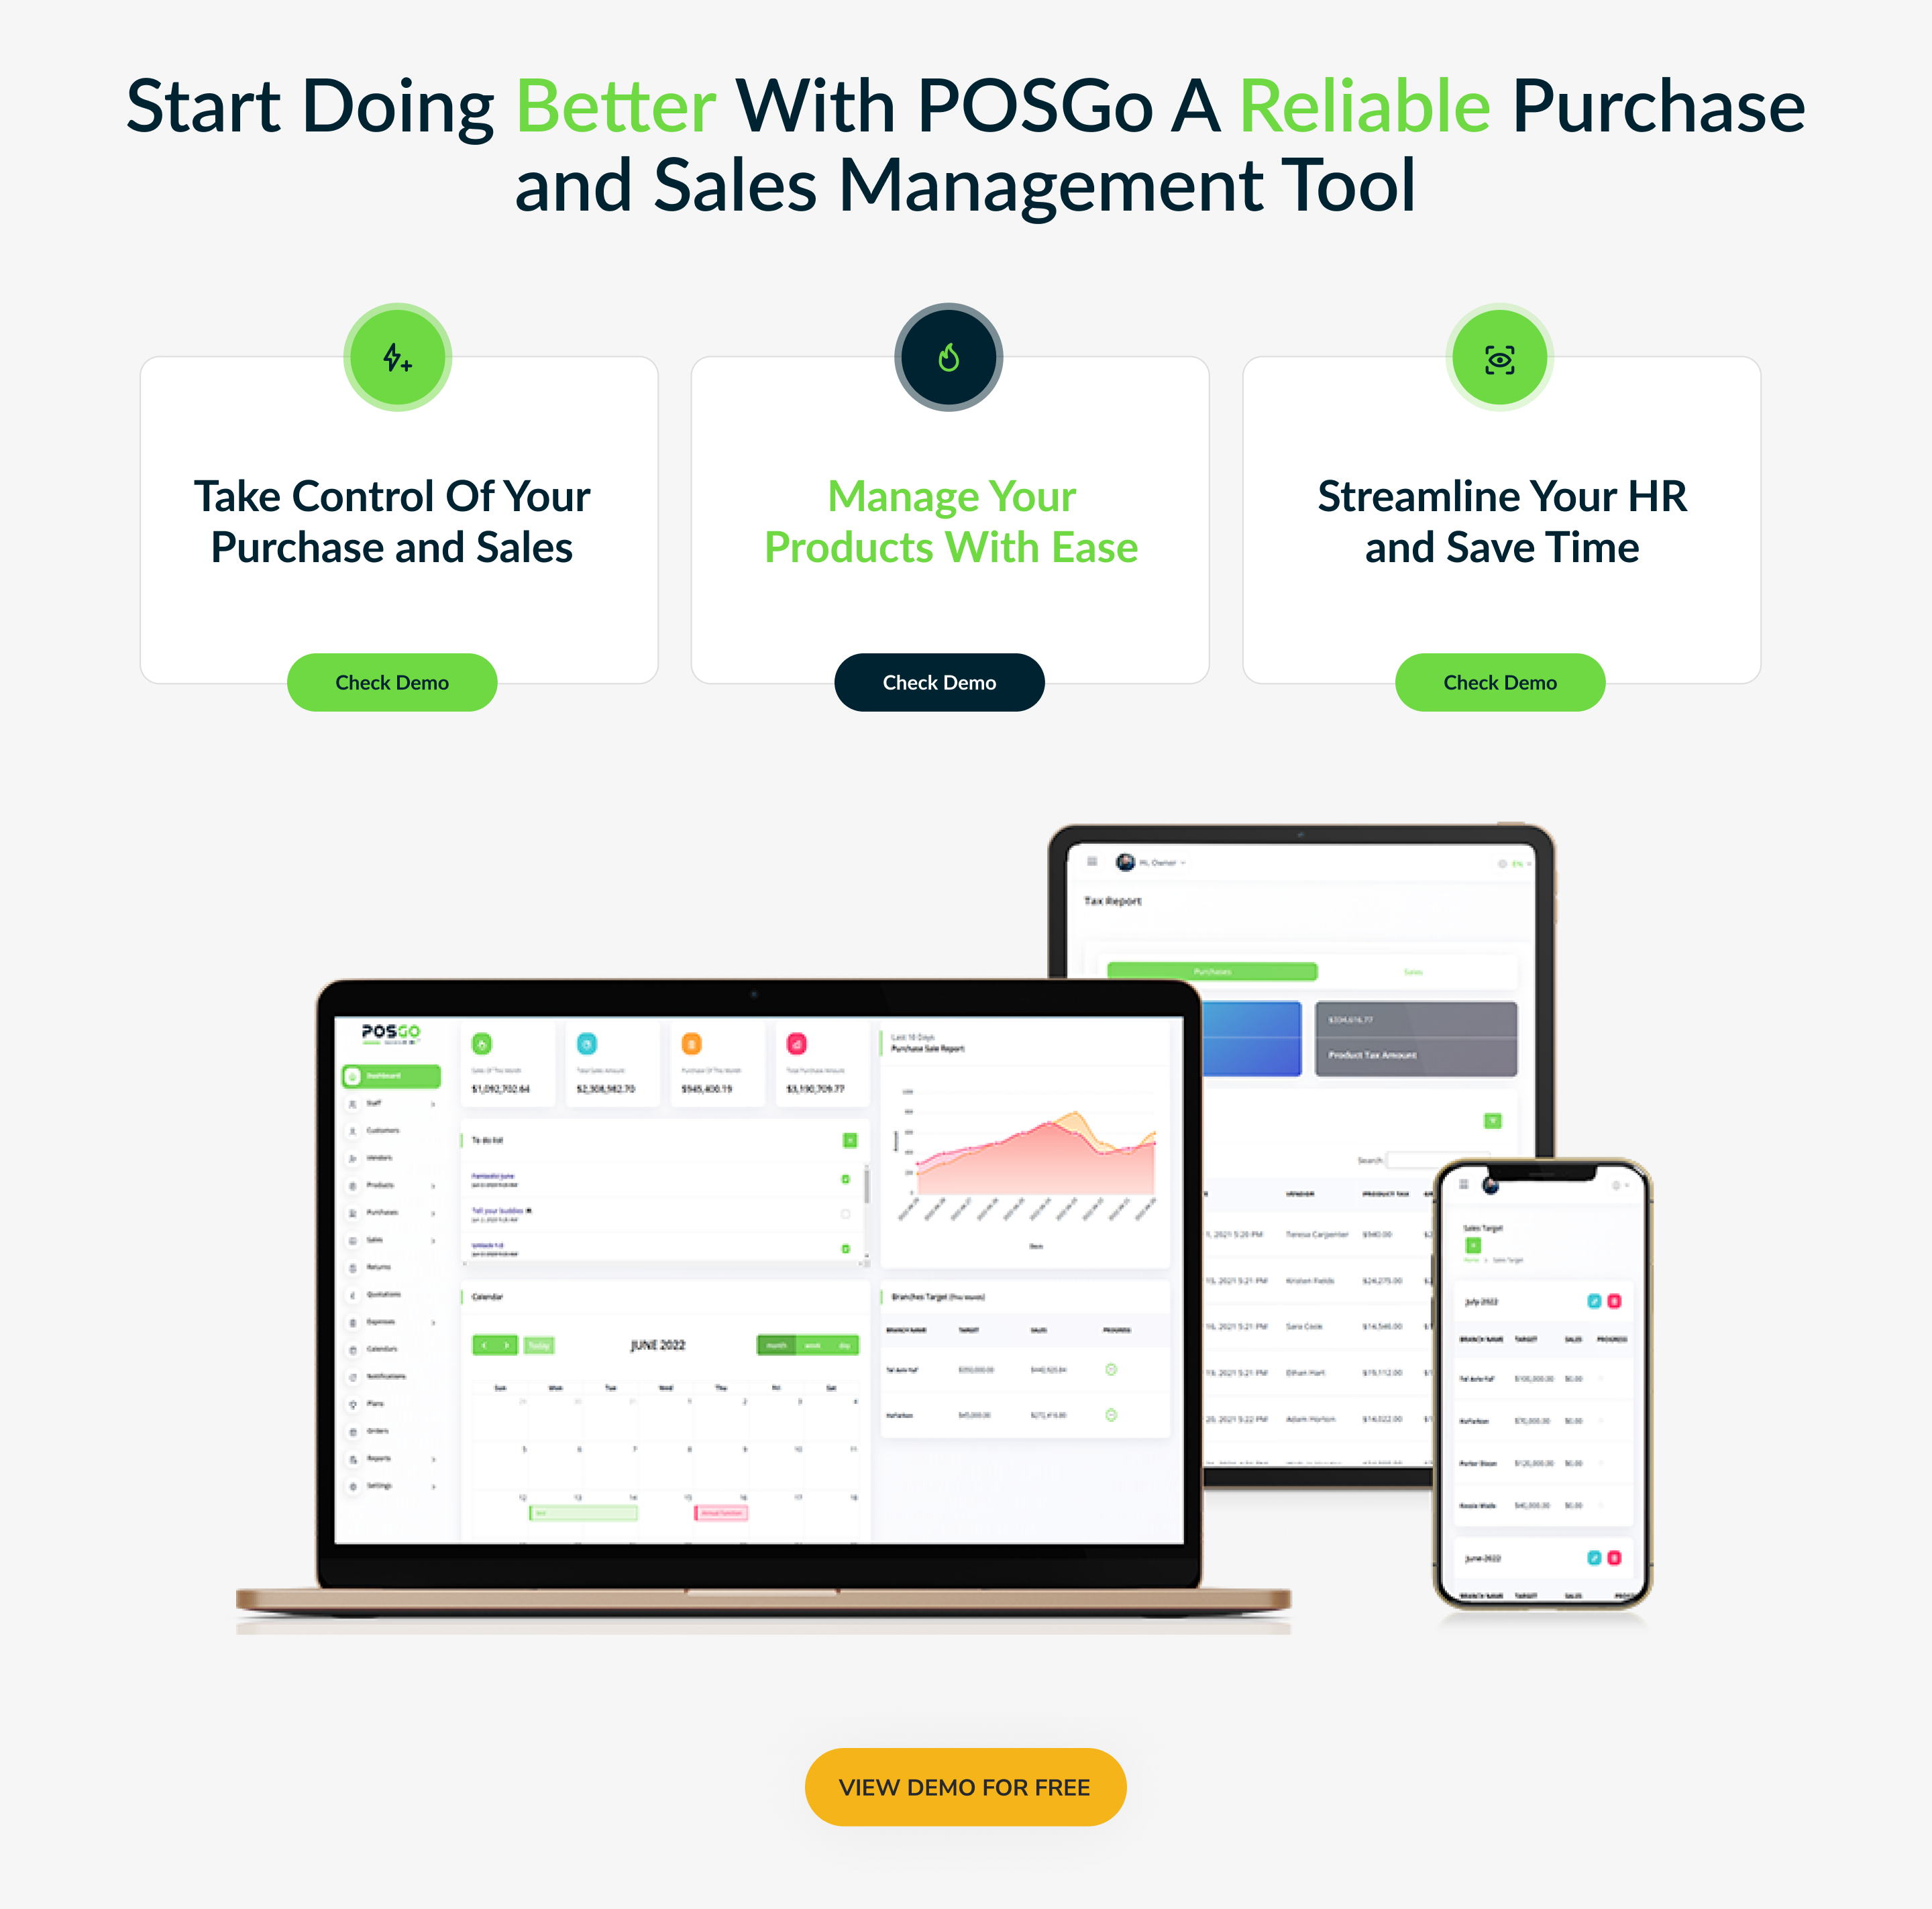 POSGo SaaS - Purchase and Sales Management Tool - 9